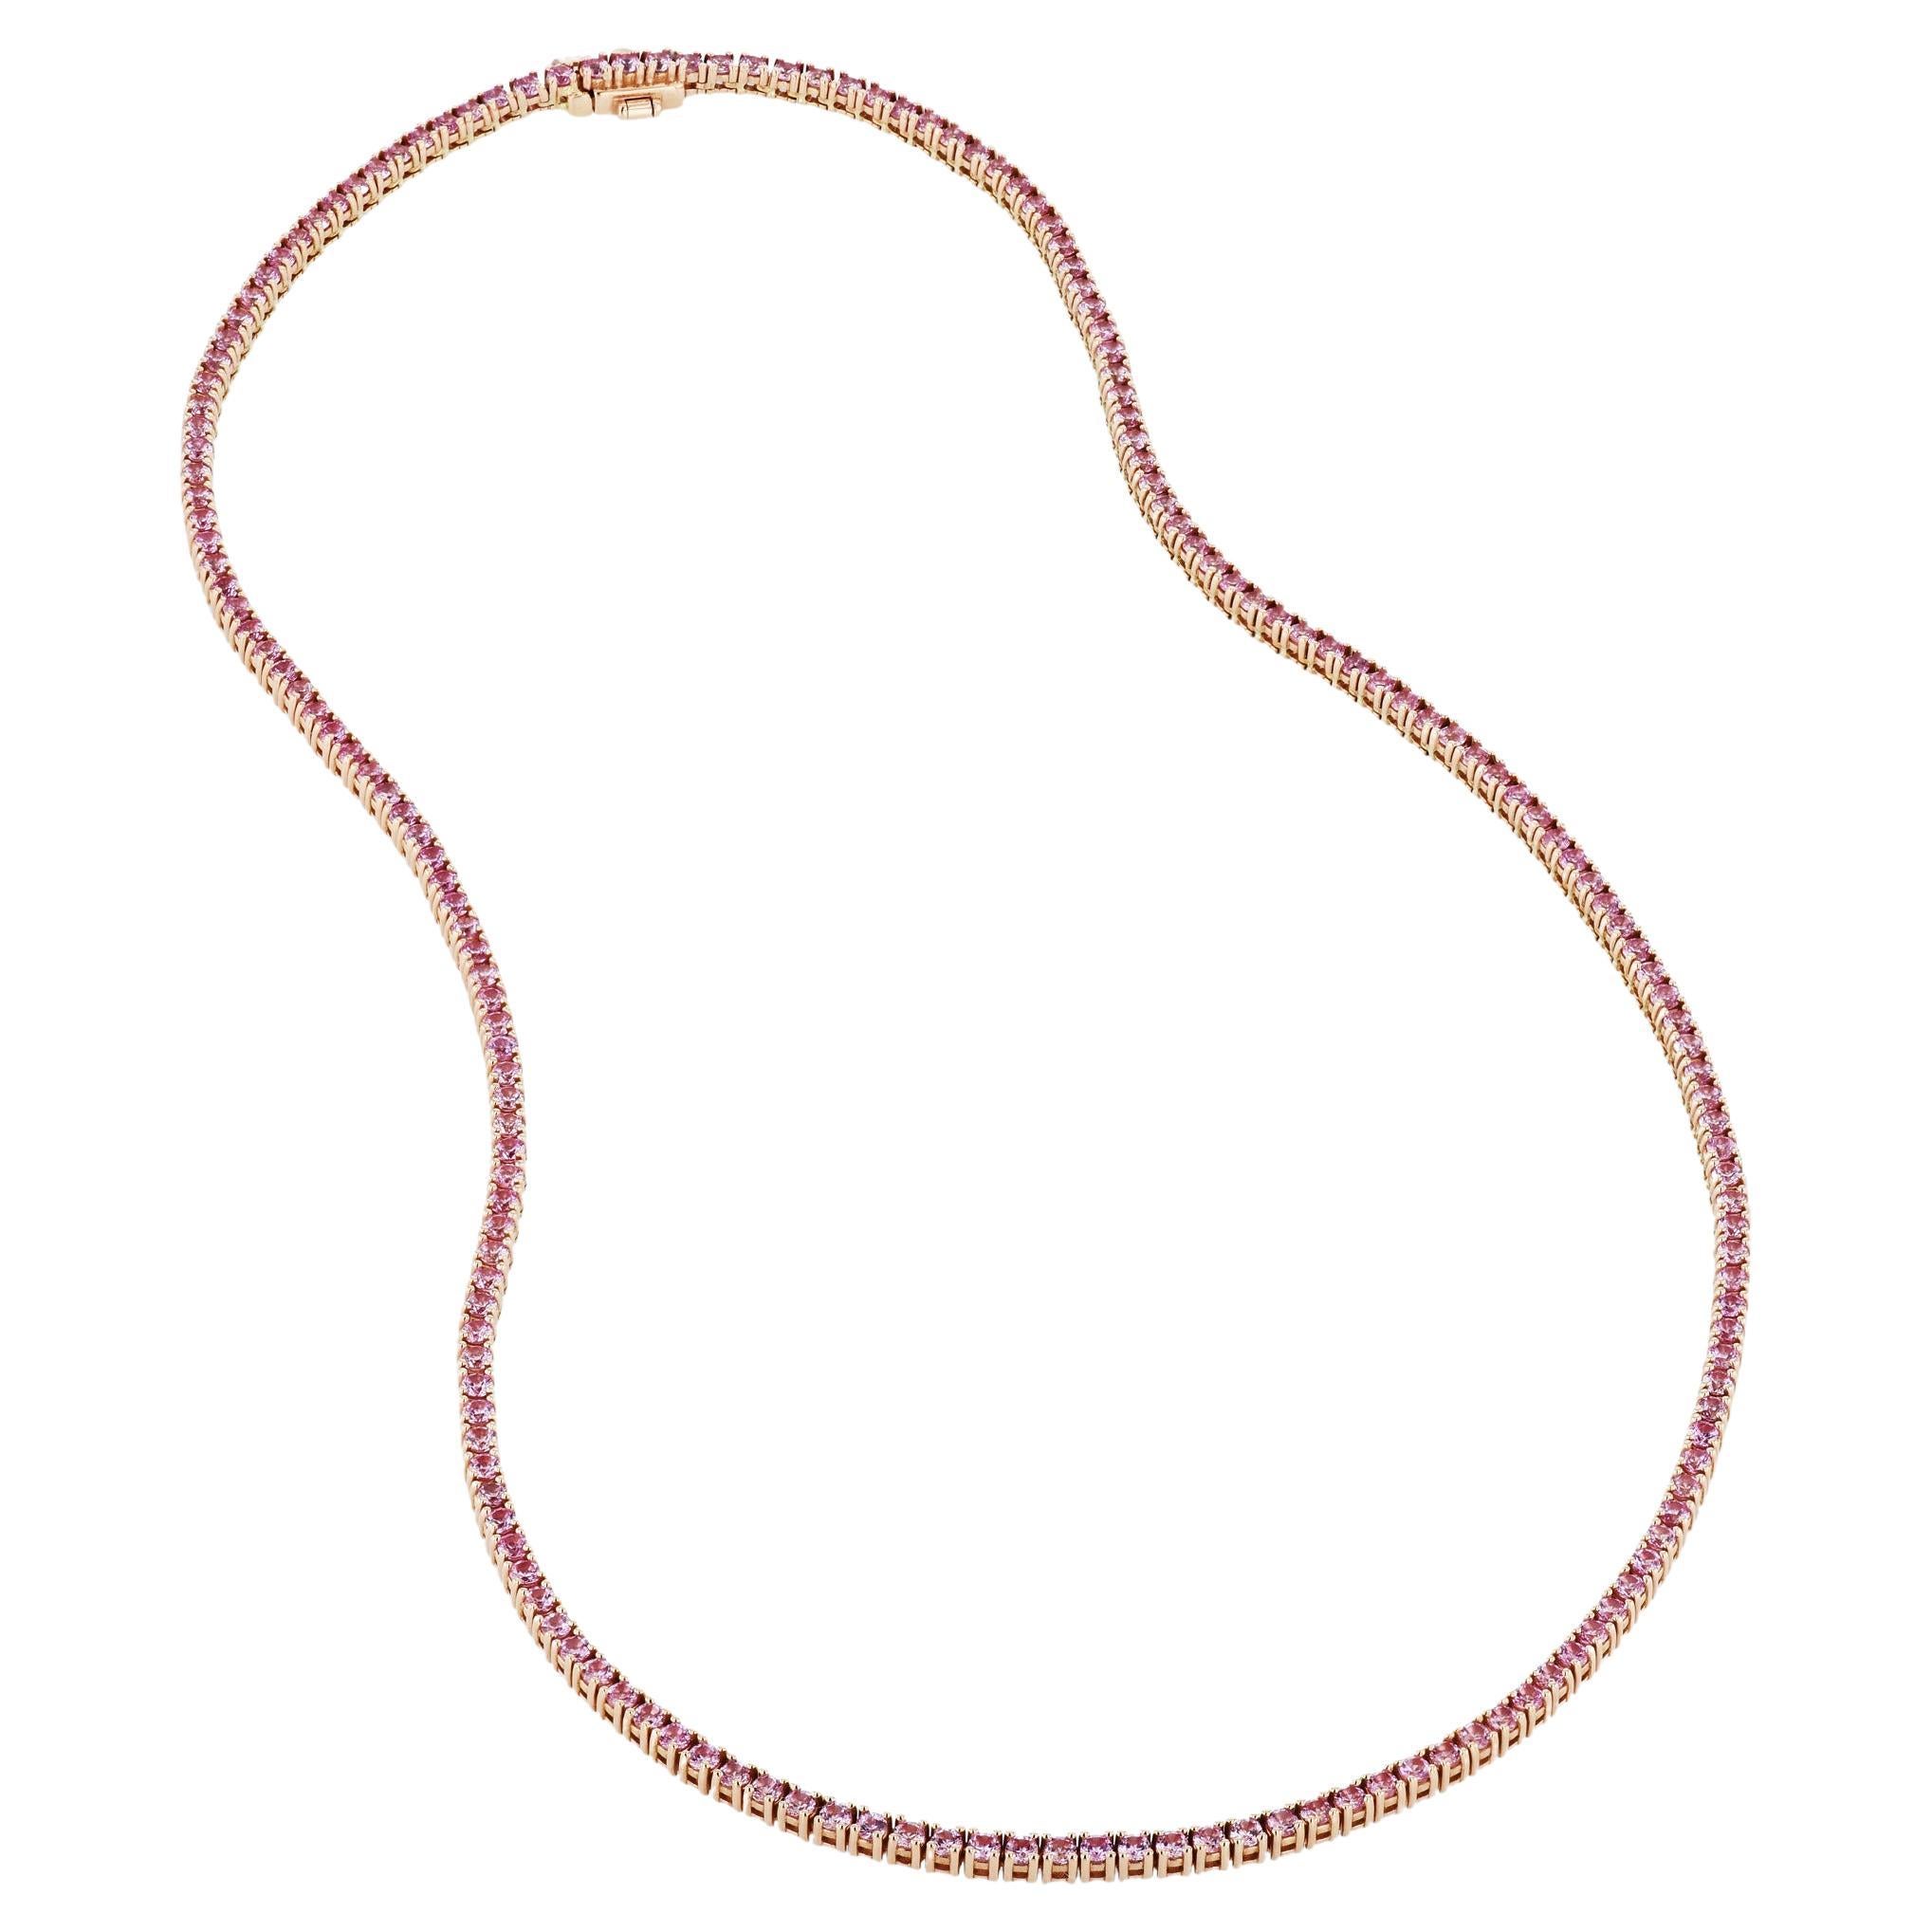 Handmade 7.58 Carat Pink Sapphire Tennis Necklace Rose Gold  For Sale